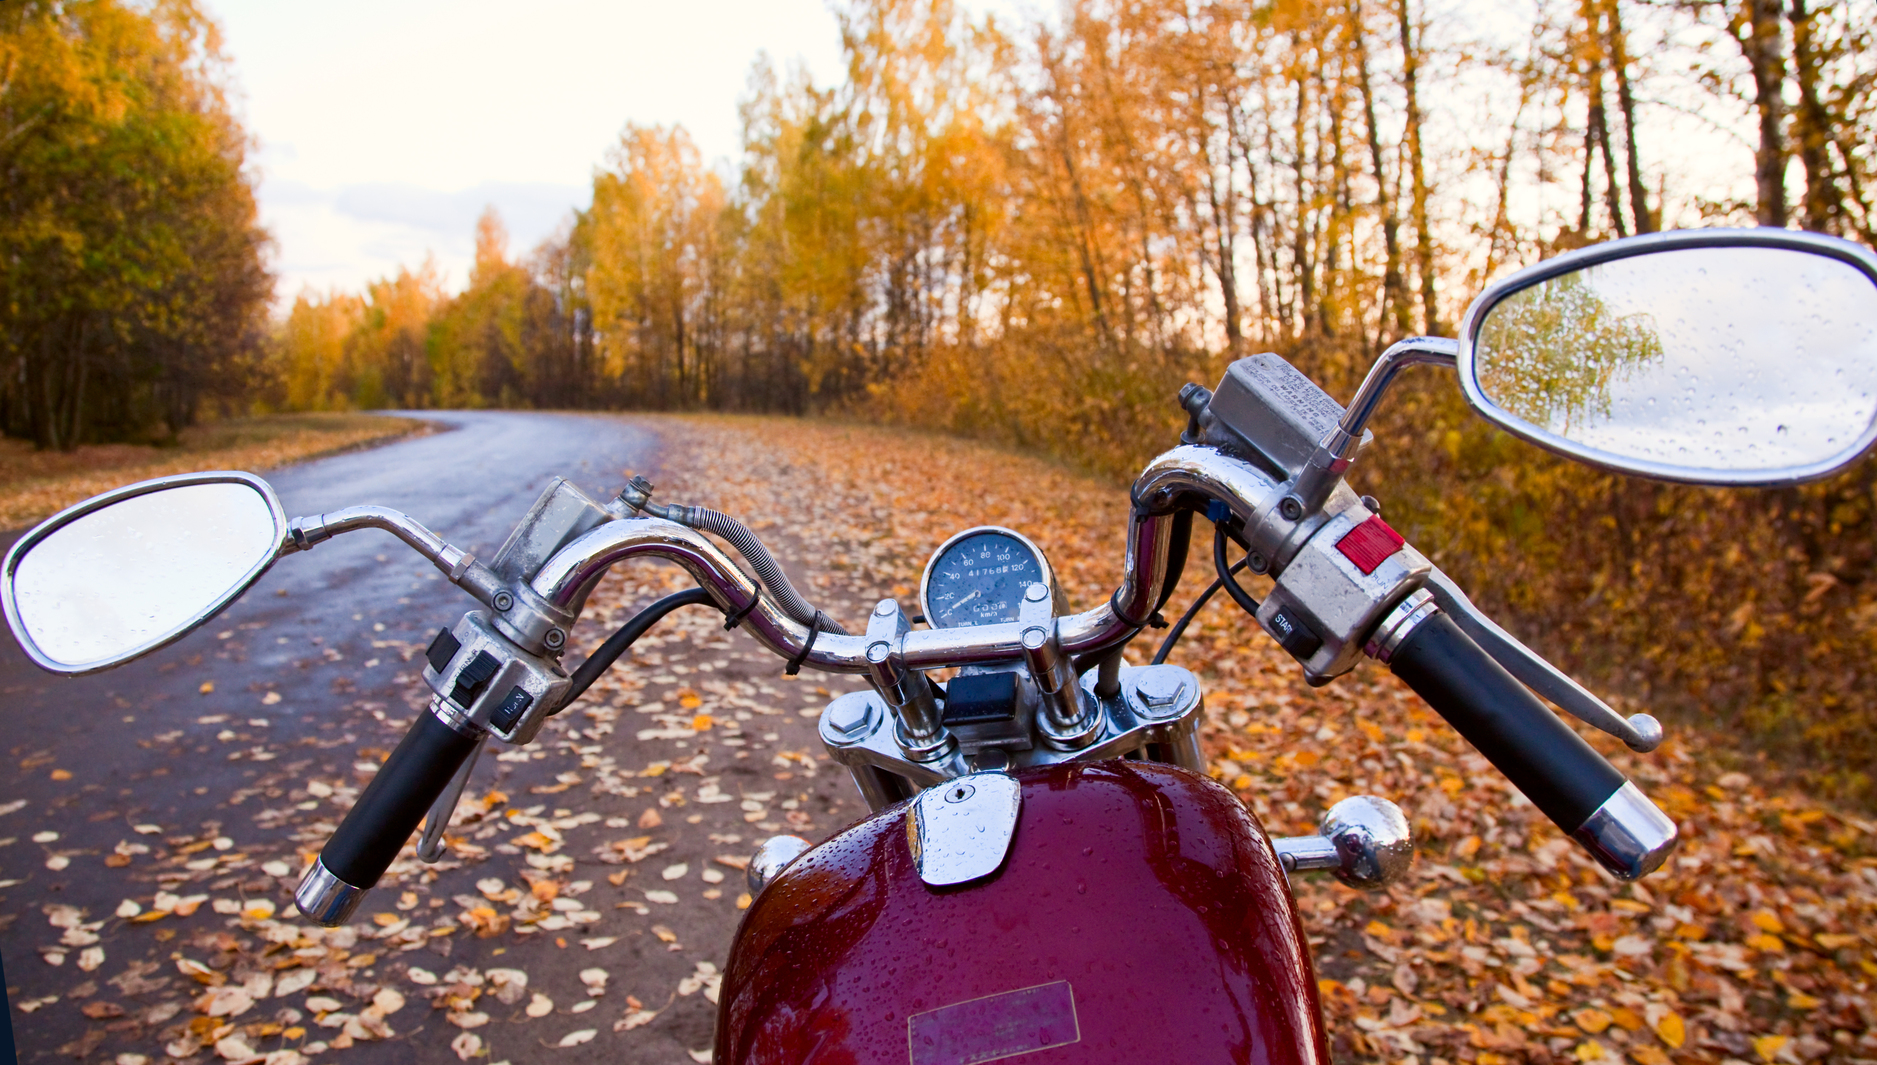 Close-up of motorcycle on road in autumn